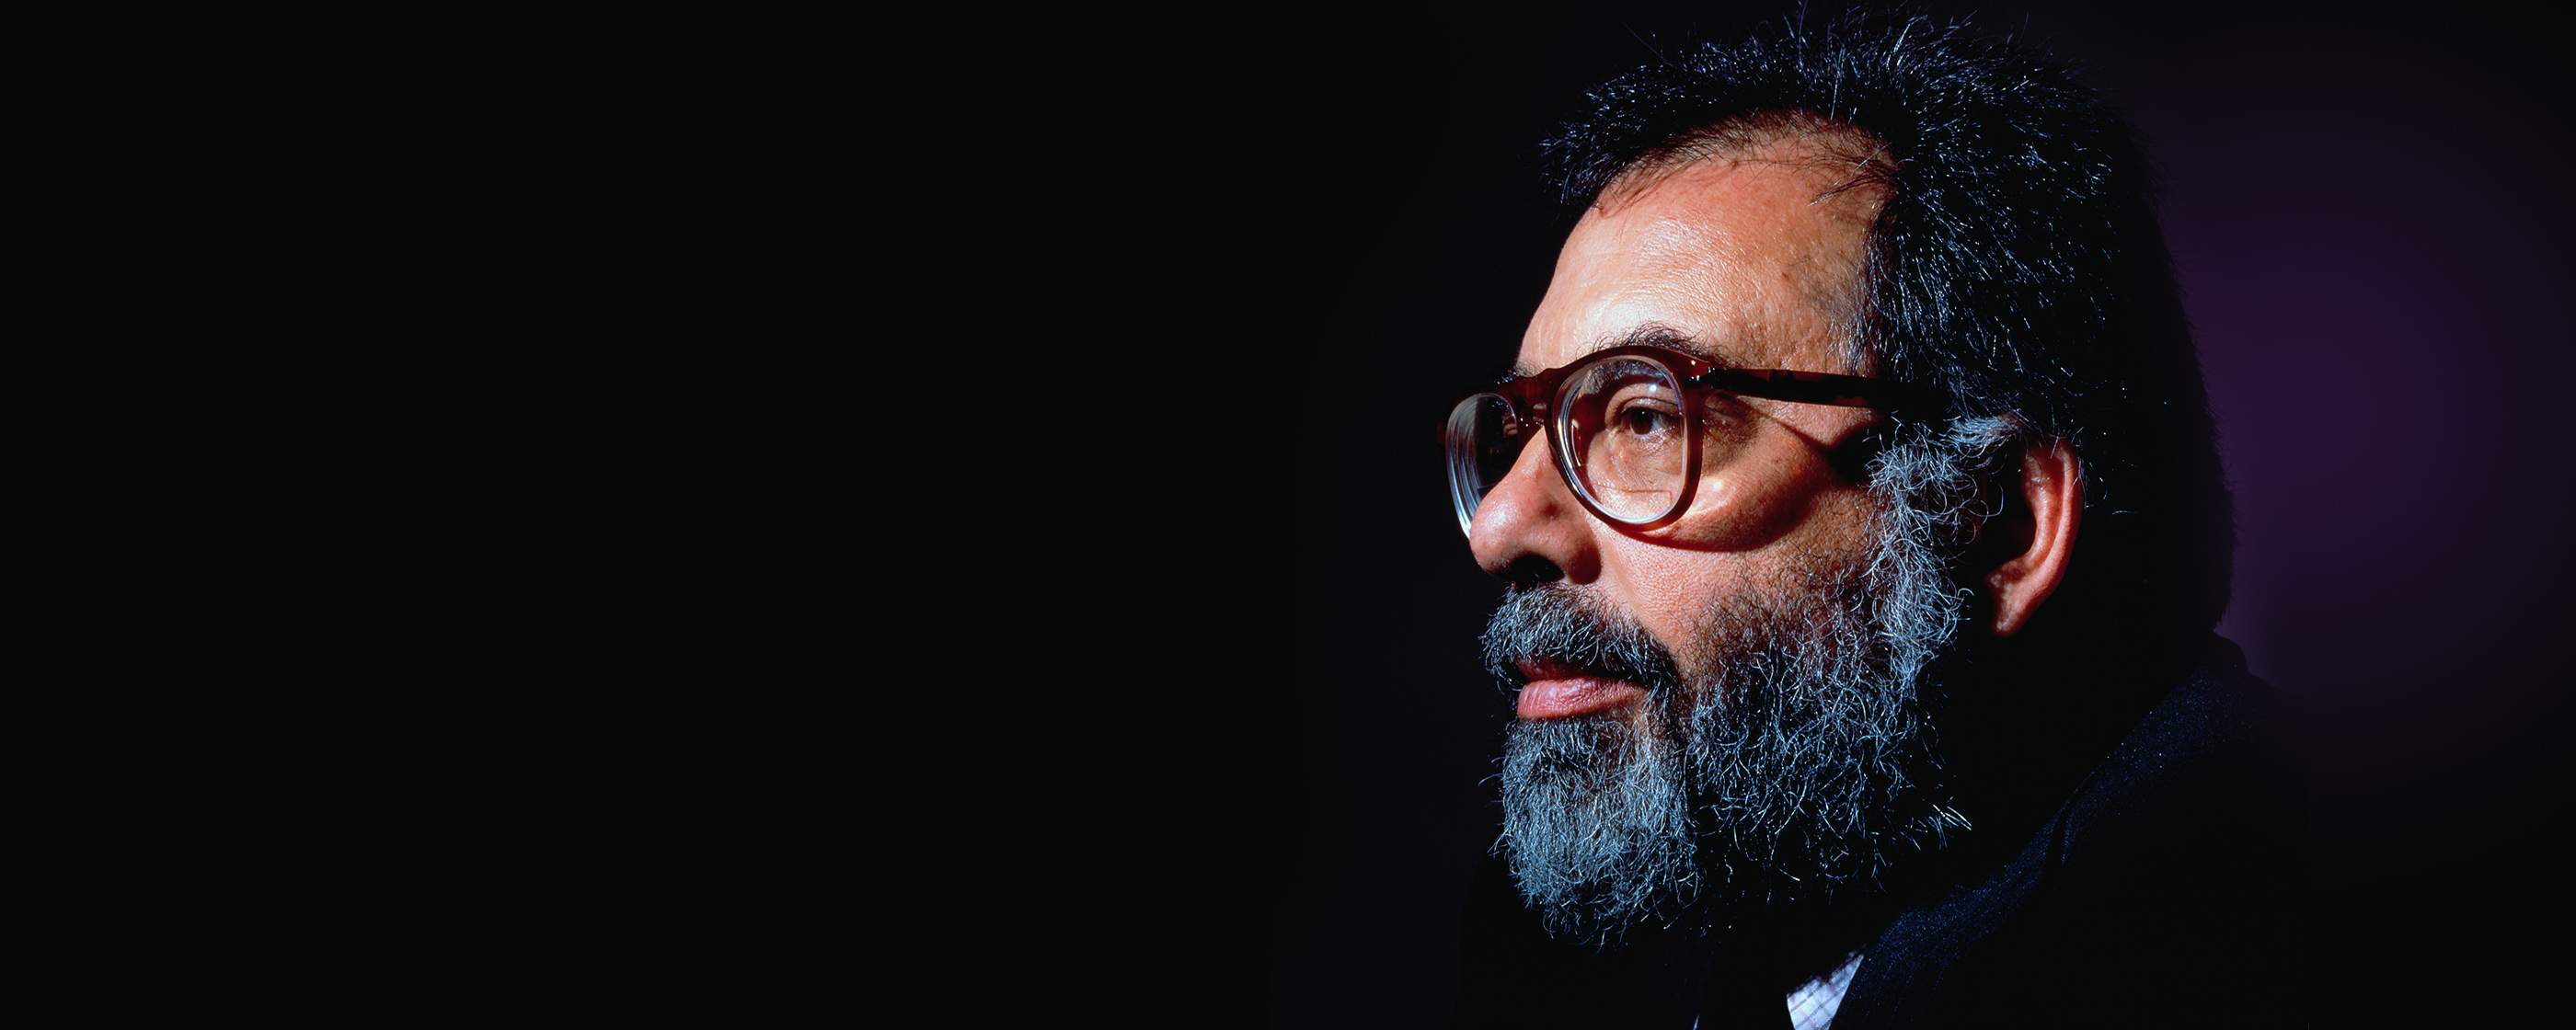 Francis Ford Coppola, Biography, Movies, Assessment, & Facts